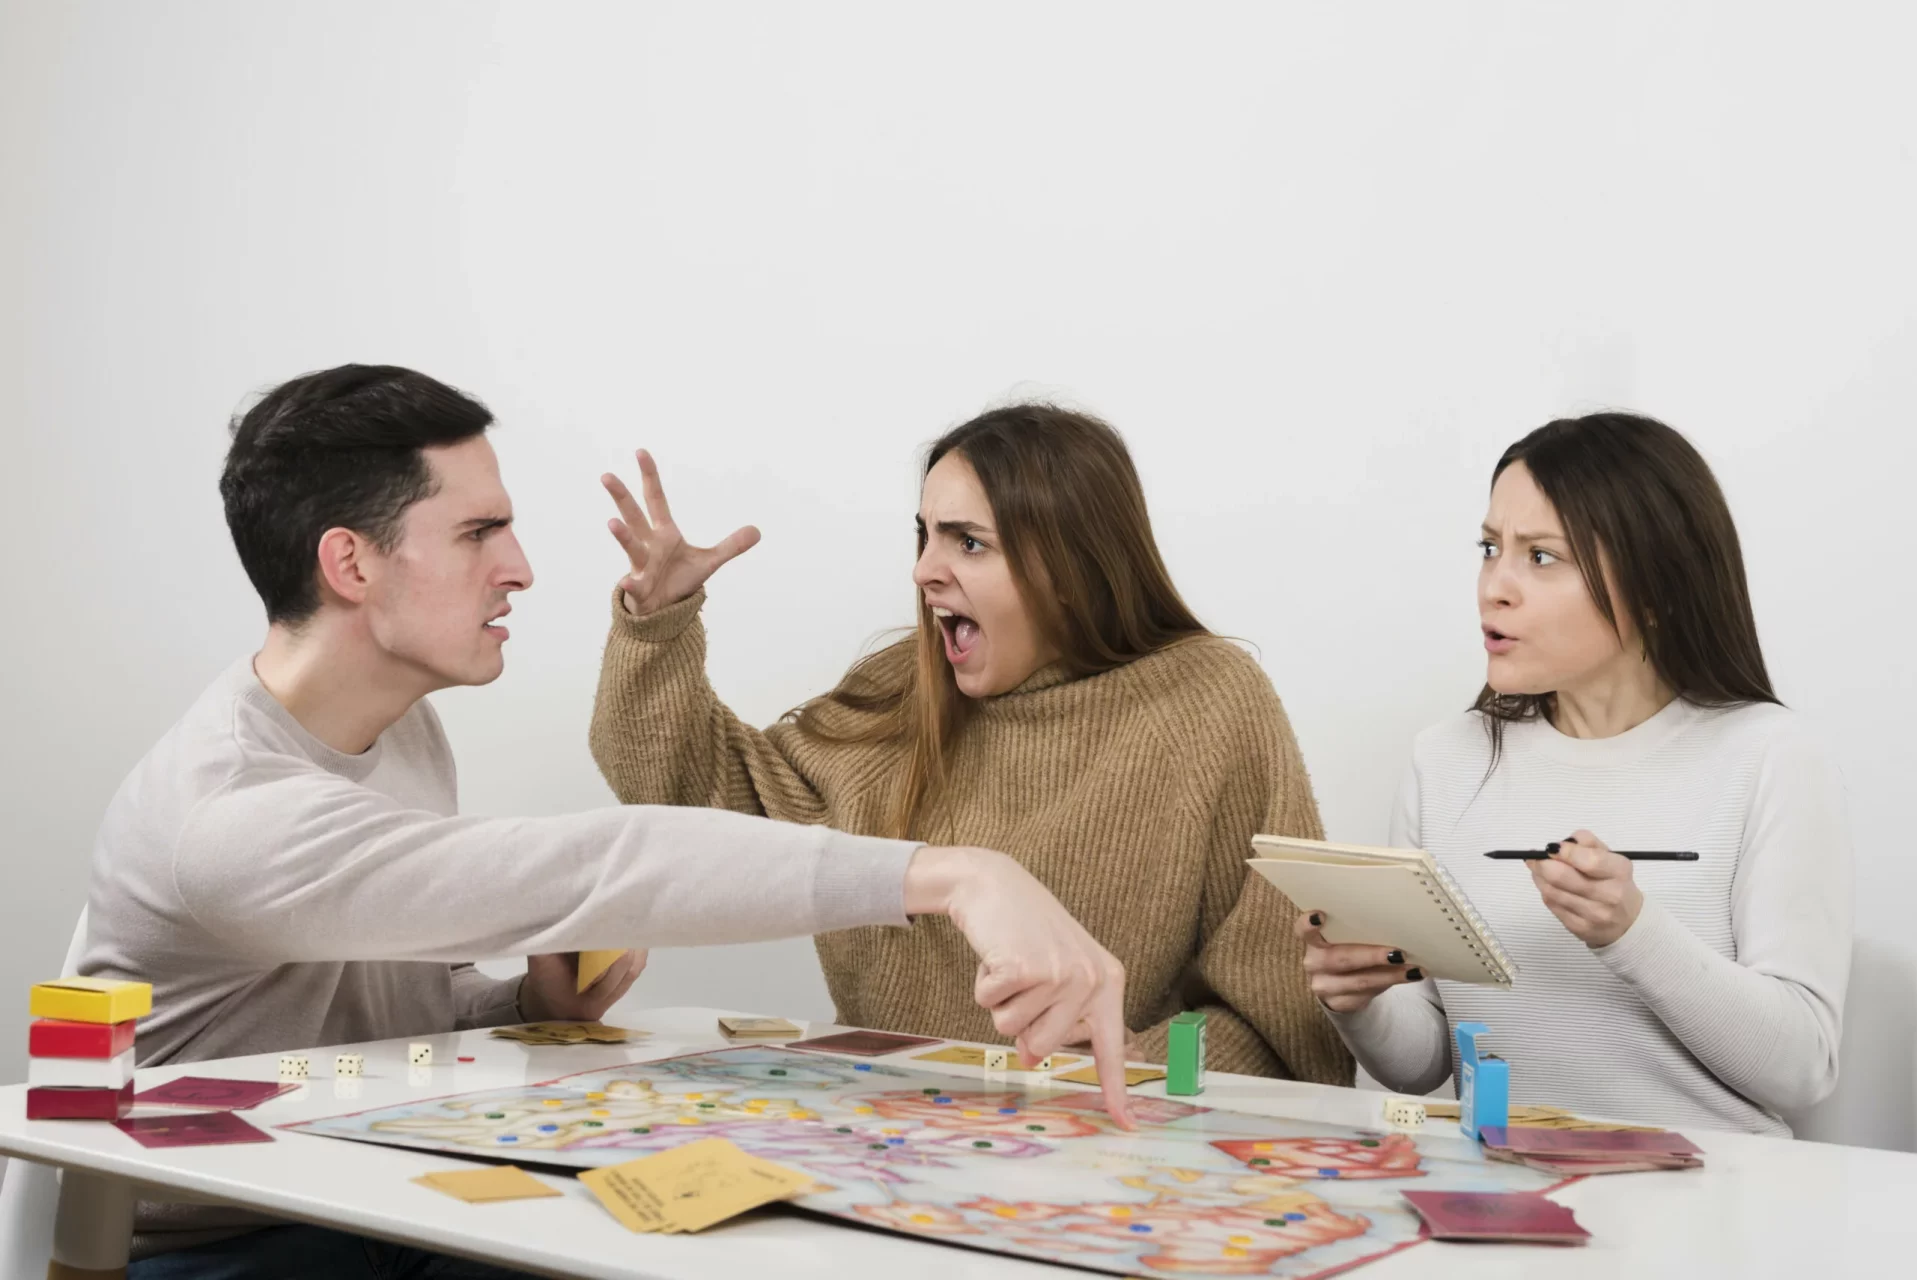 Three people argue over bad user instructions for a board game